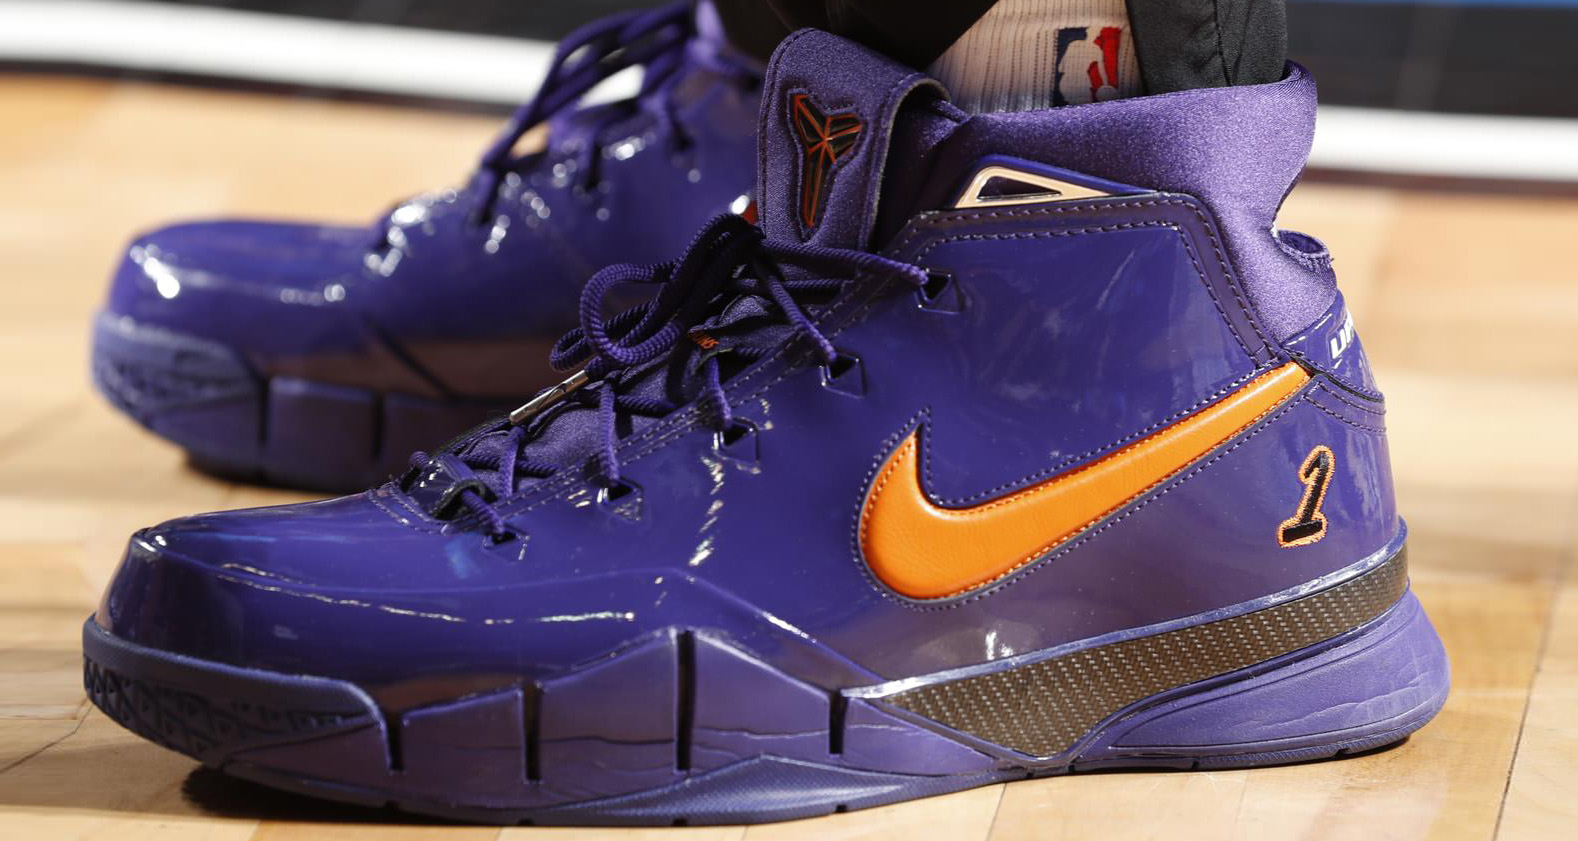 Devin Booker Has Been Playing in Heat Since His Kentucky Days | Nice Kicks